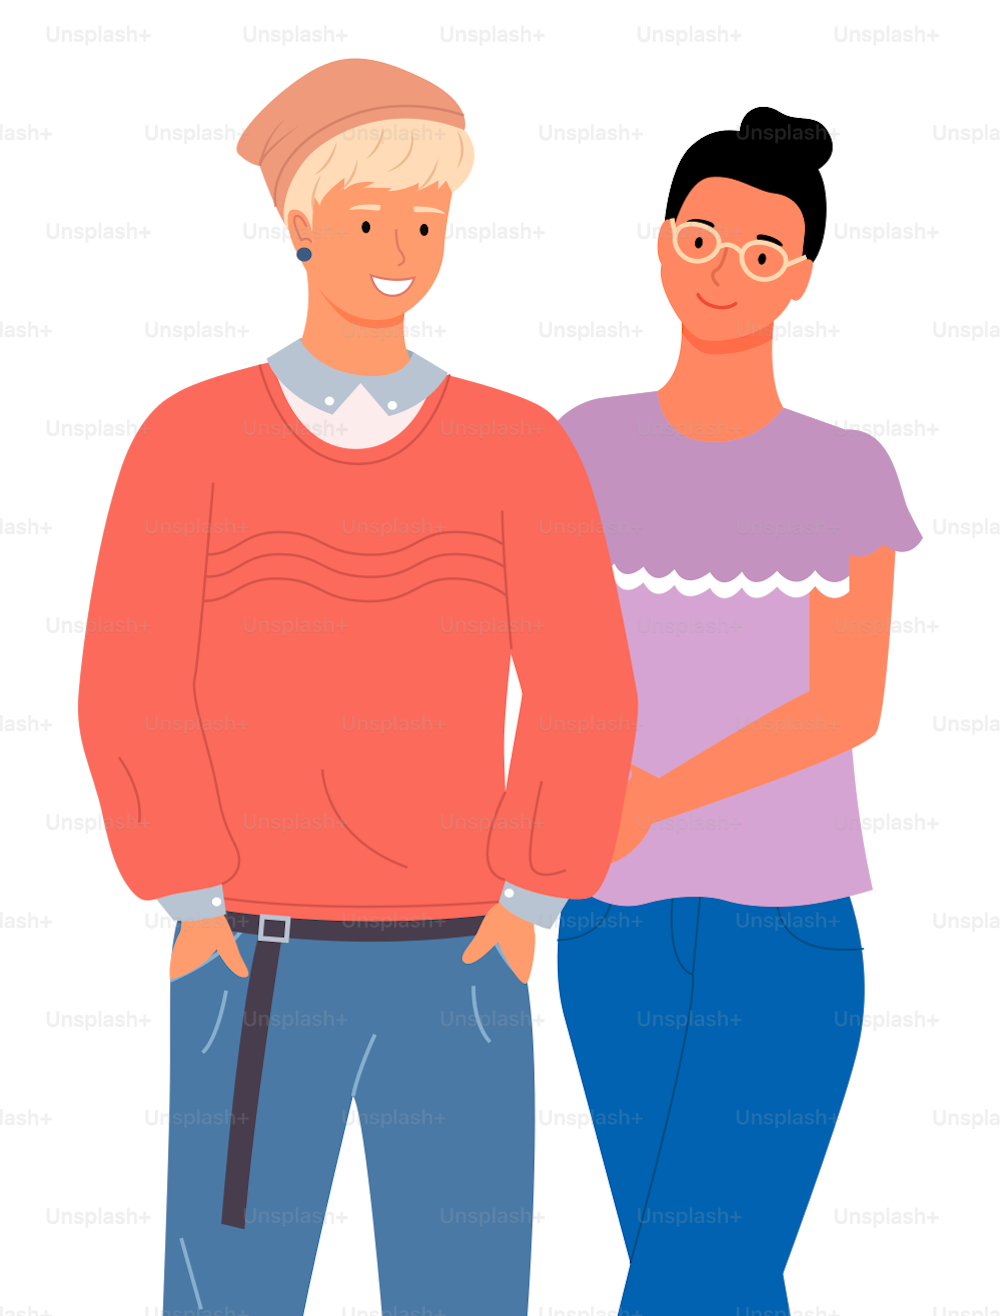 International nationality man and woman smiling. Young stylish blonde guy wearing sweater, shirt, jeans, hat. Pretty girl with hairstyle wearing violet t-shirt and jeans. Multinational people